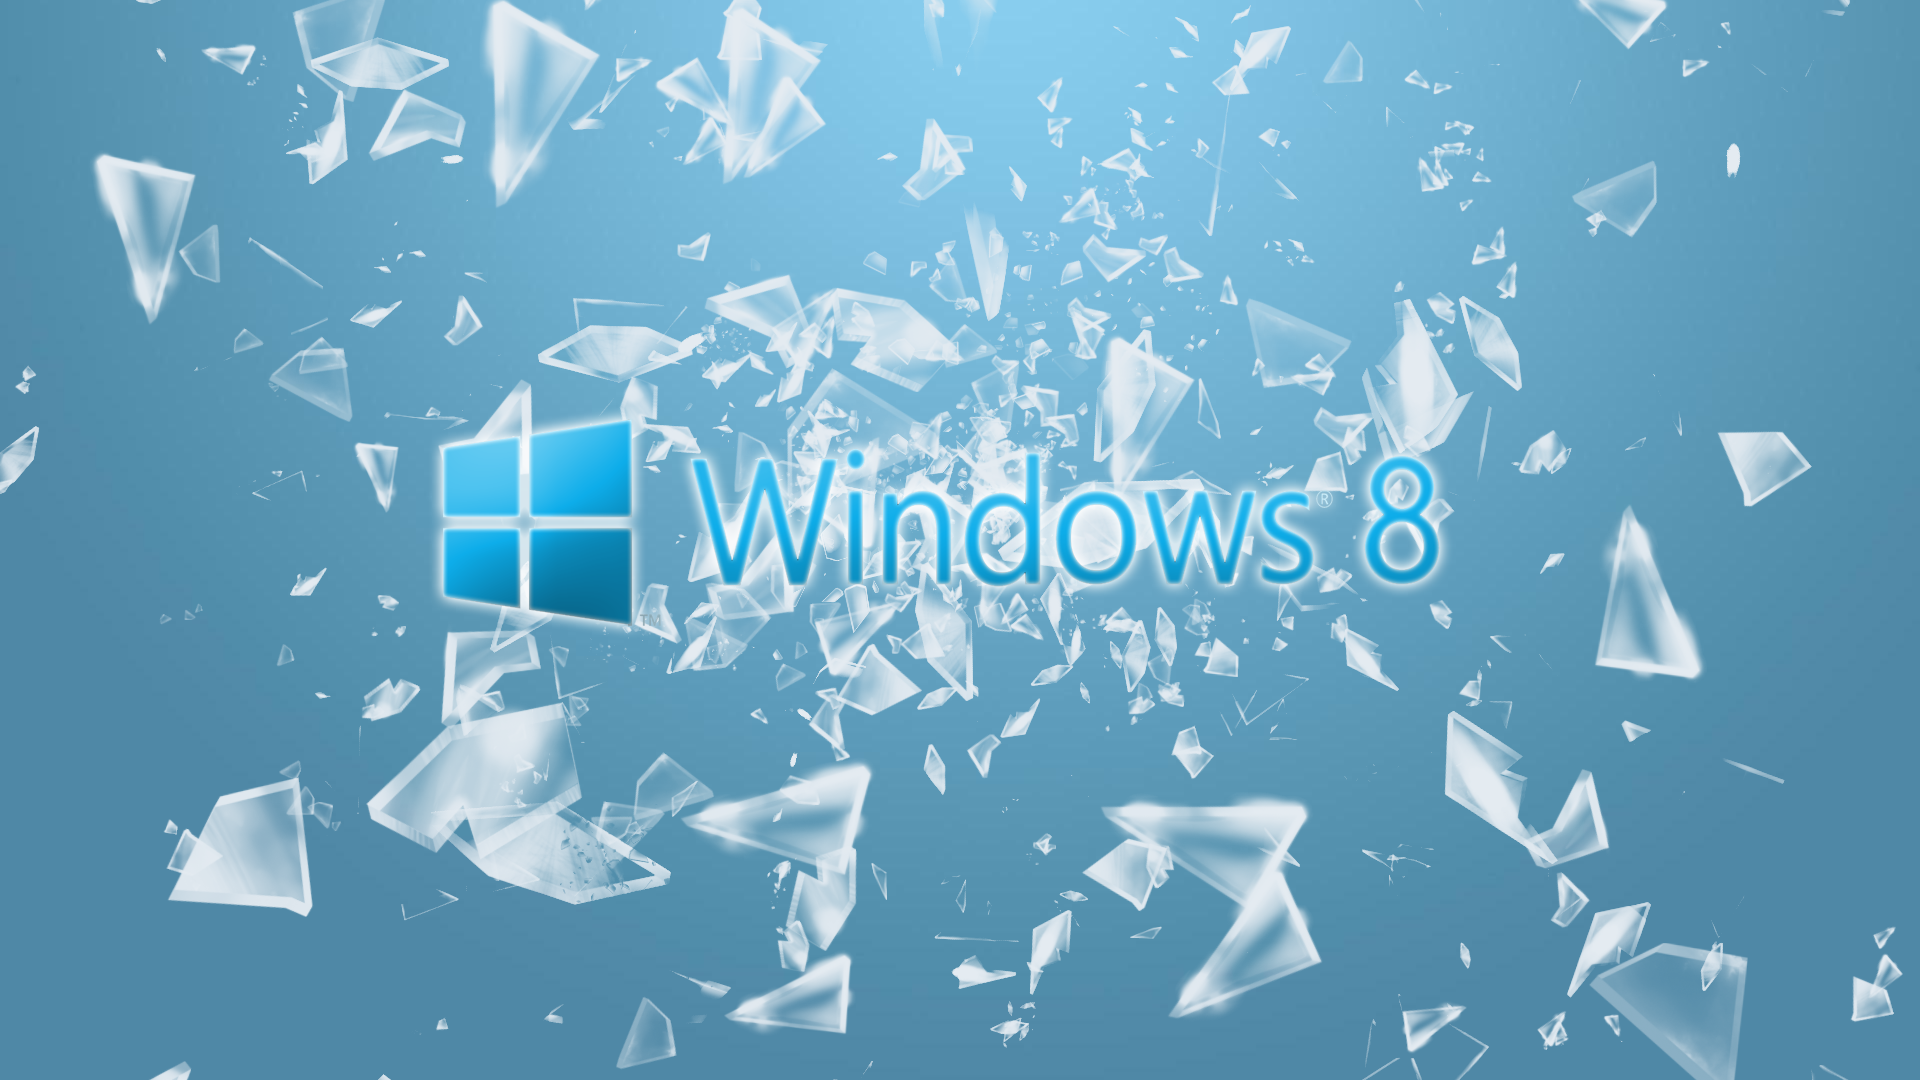 Download these 44 HD Windows 8 Wallpaper Images 1920x1080